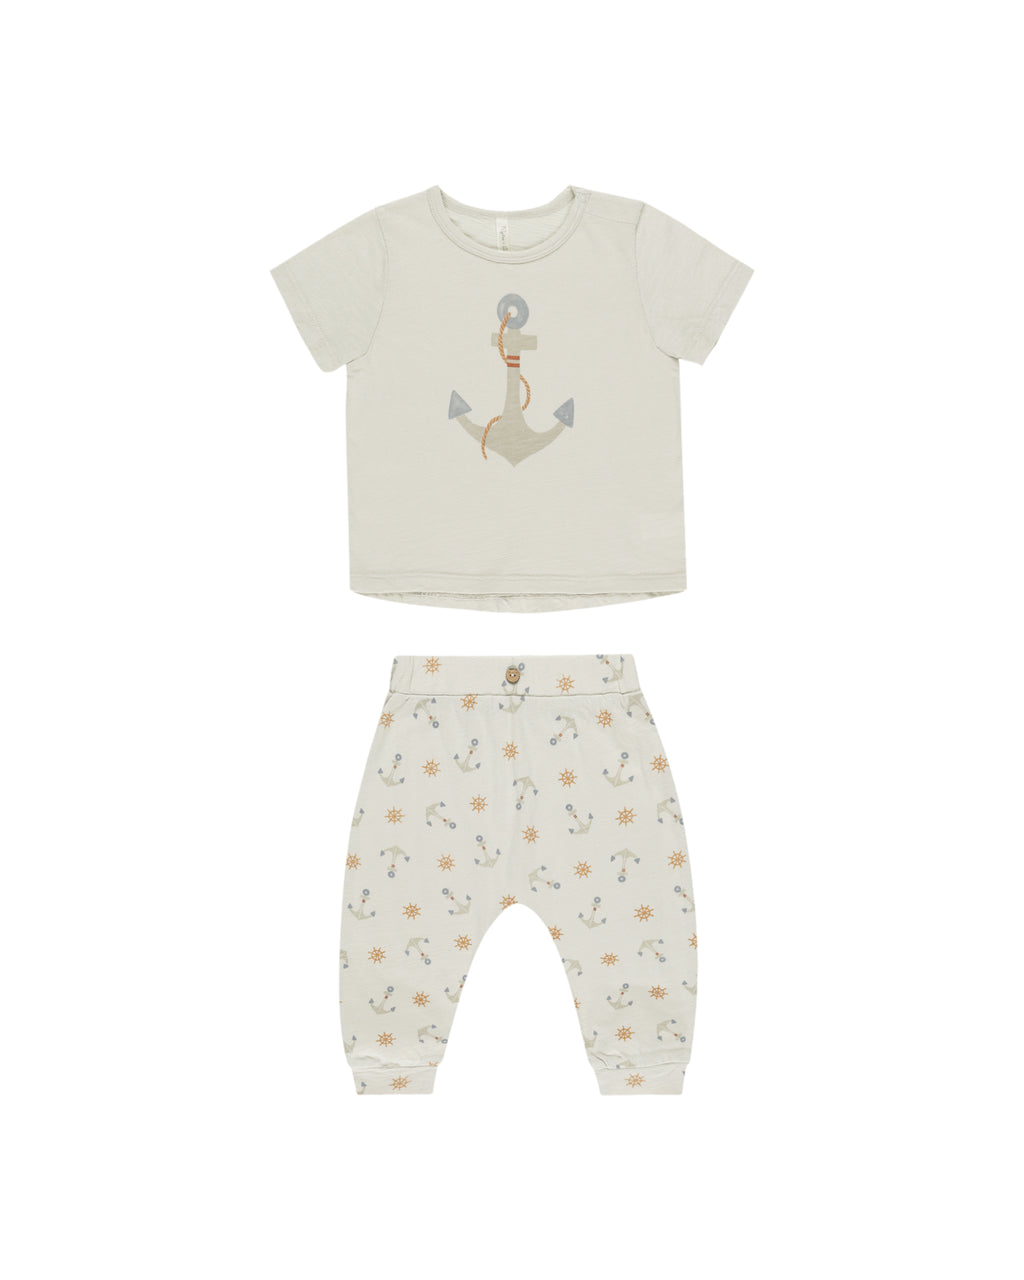 Rylee + Cru Tee and Slouch Pant Set in Anchors